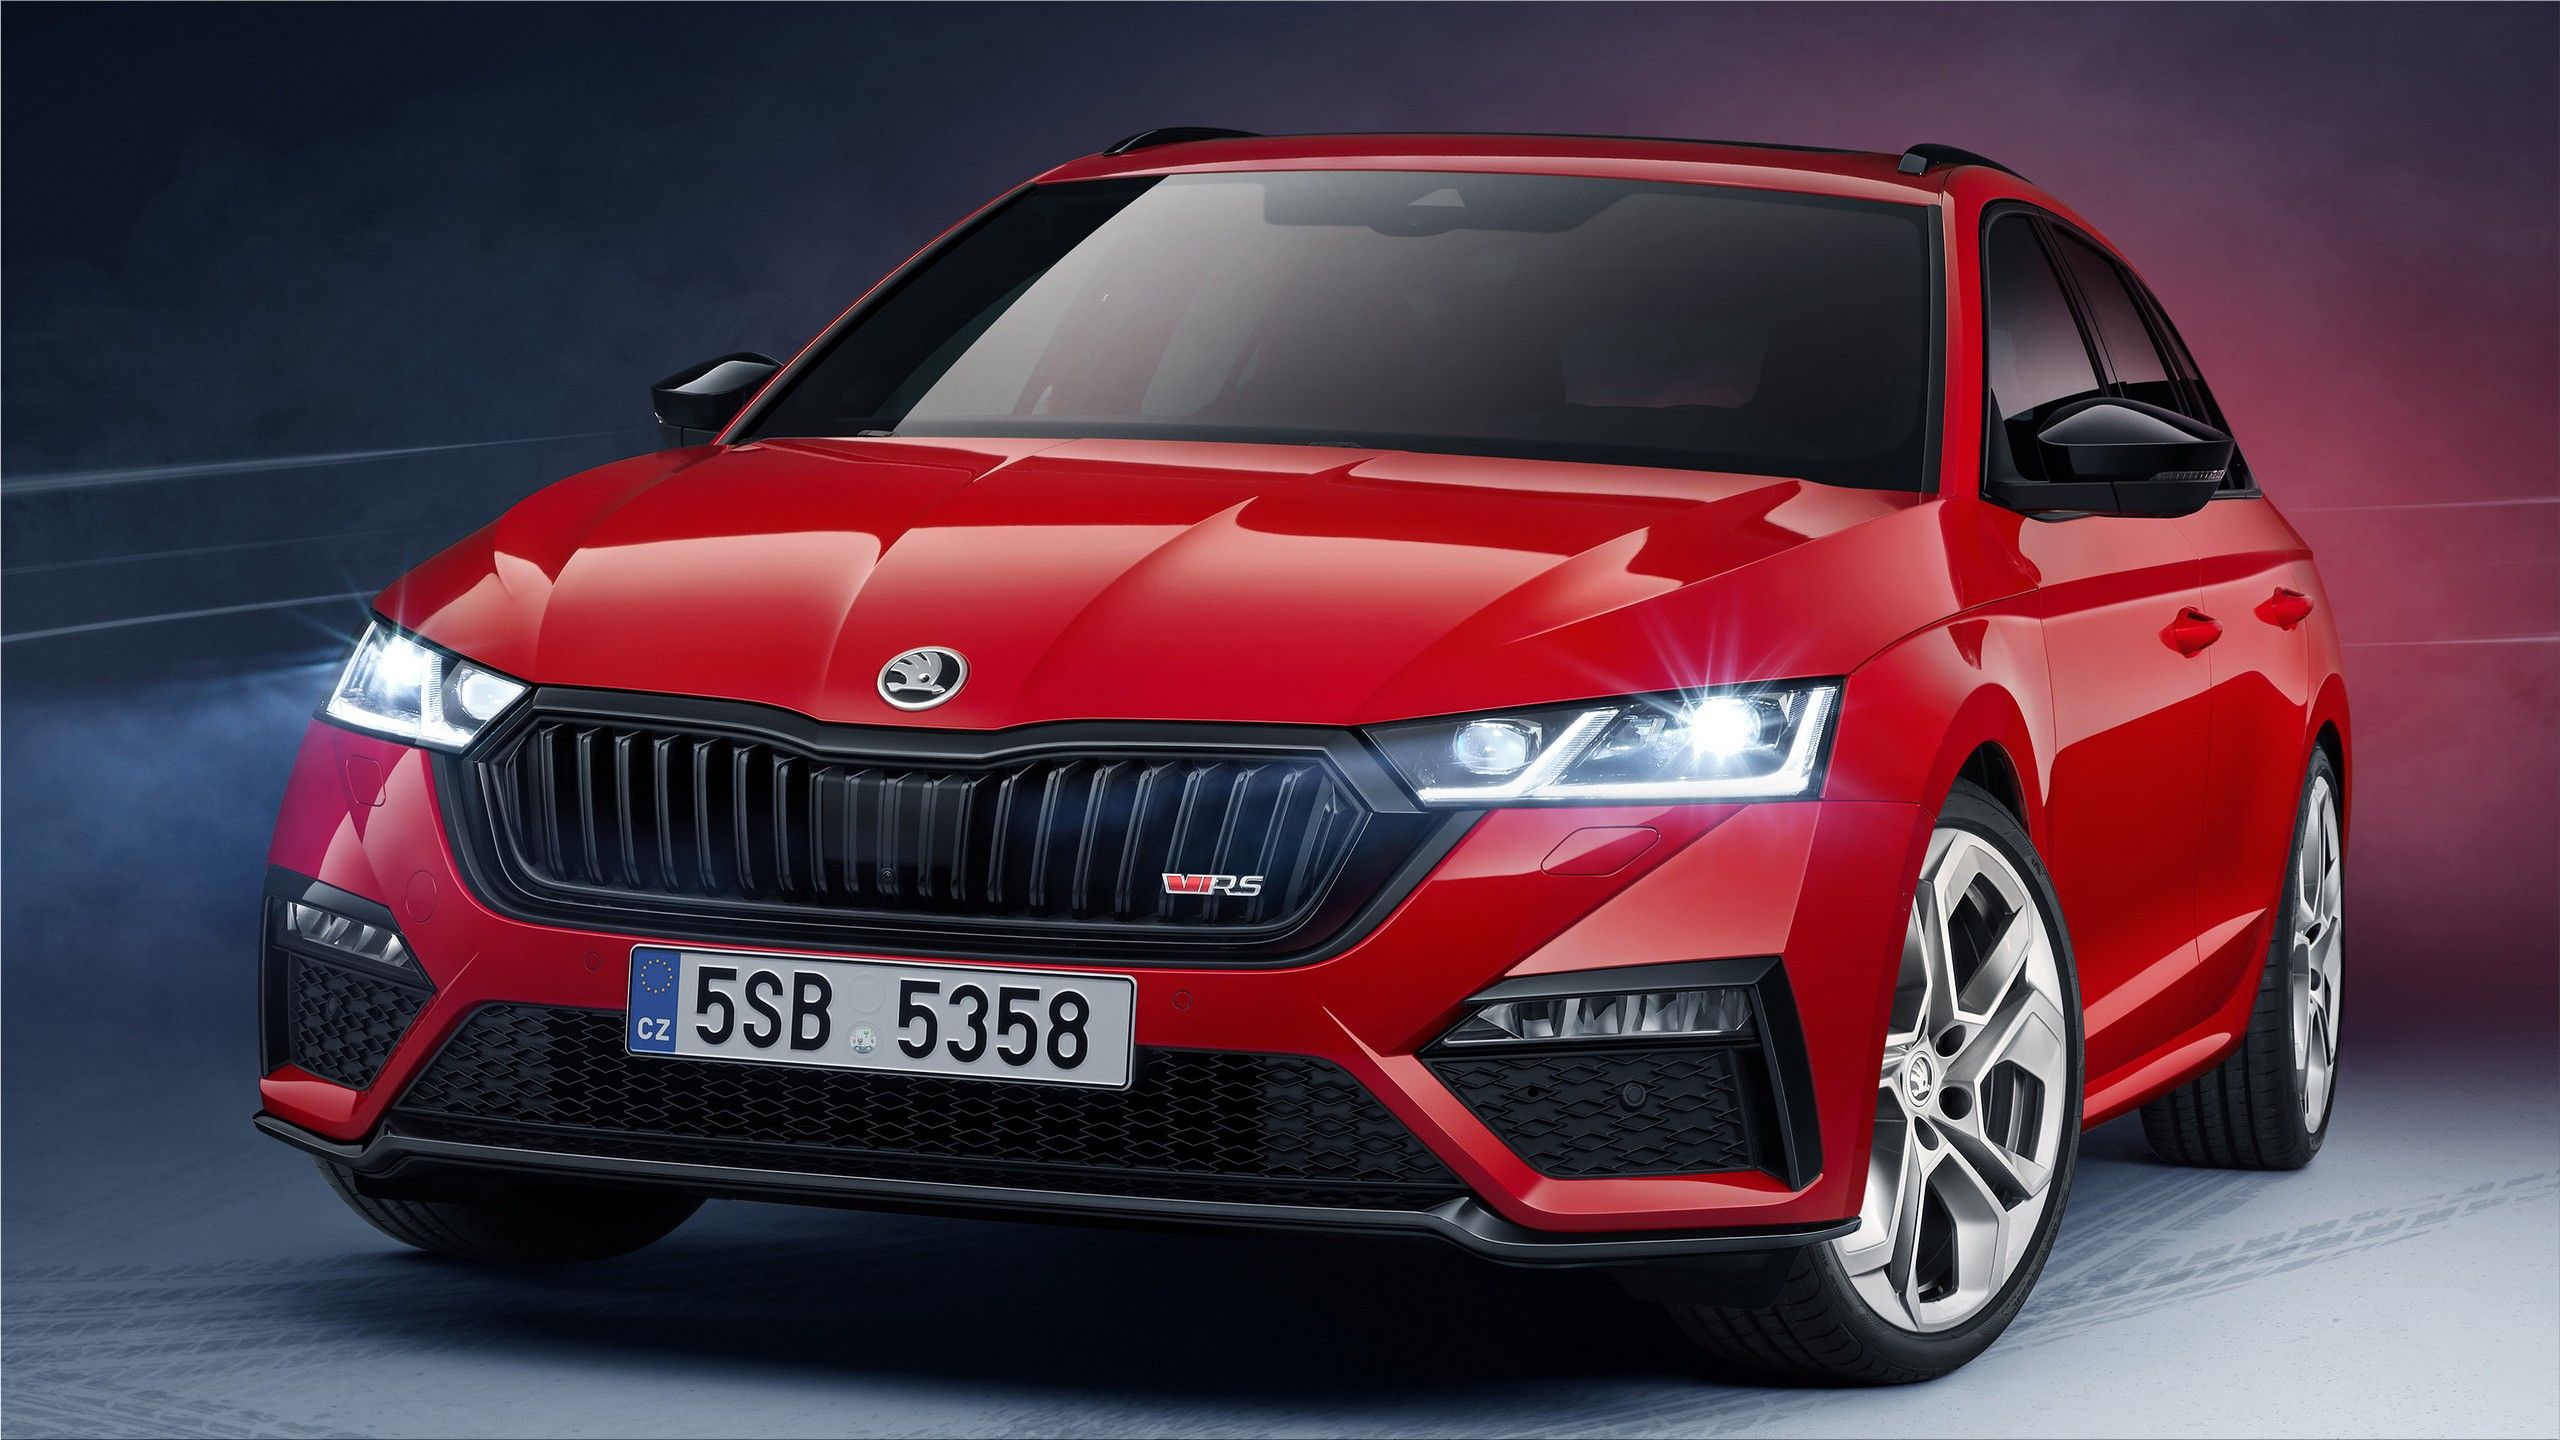 The Skoda Octavia Combi RS with pure combustion engines